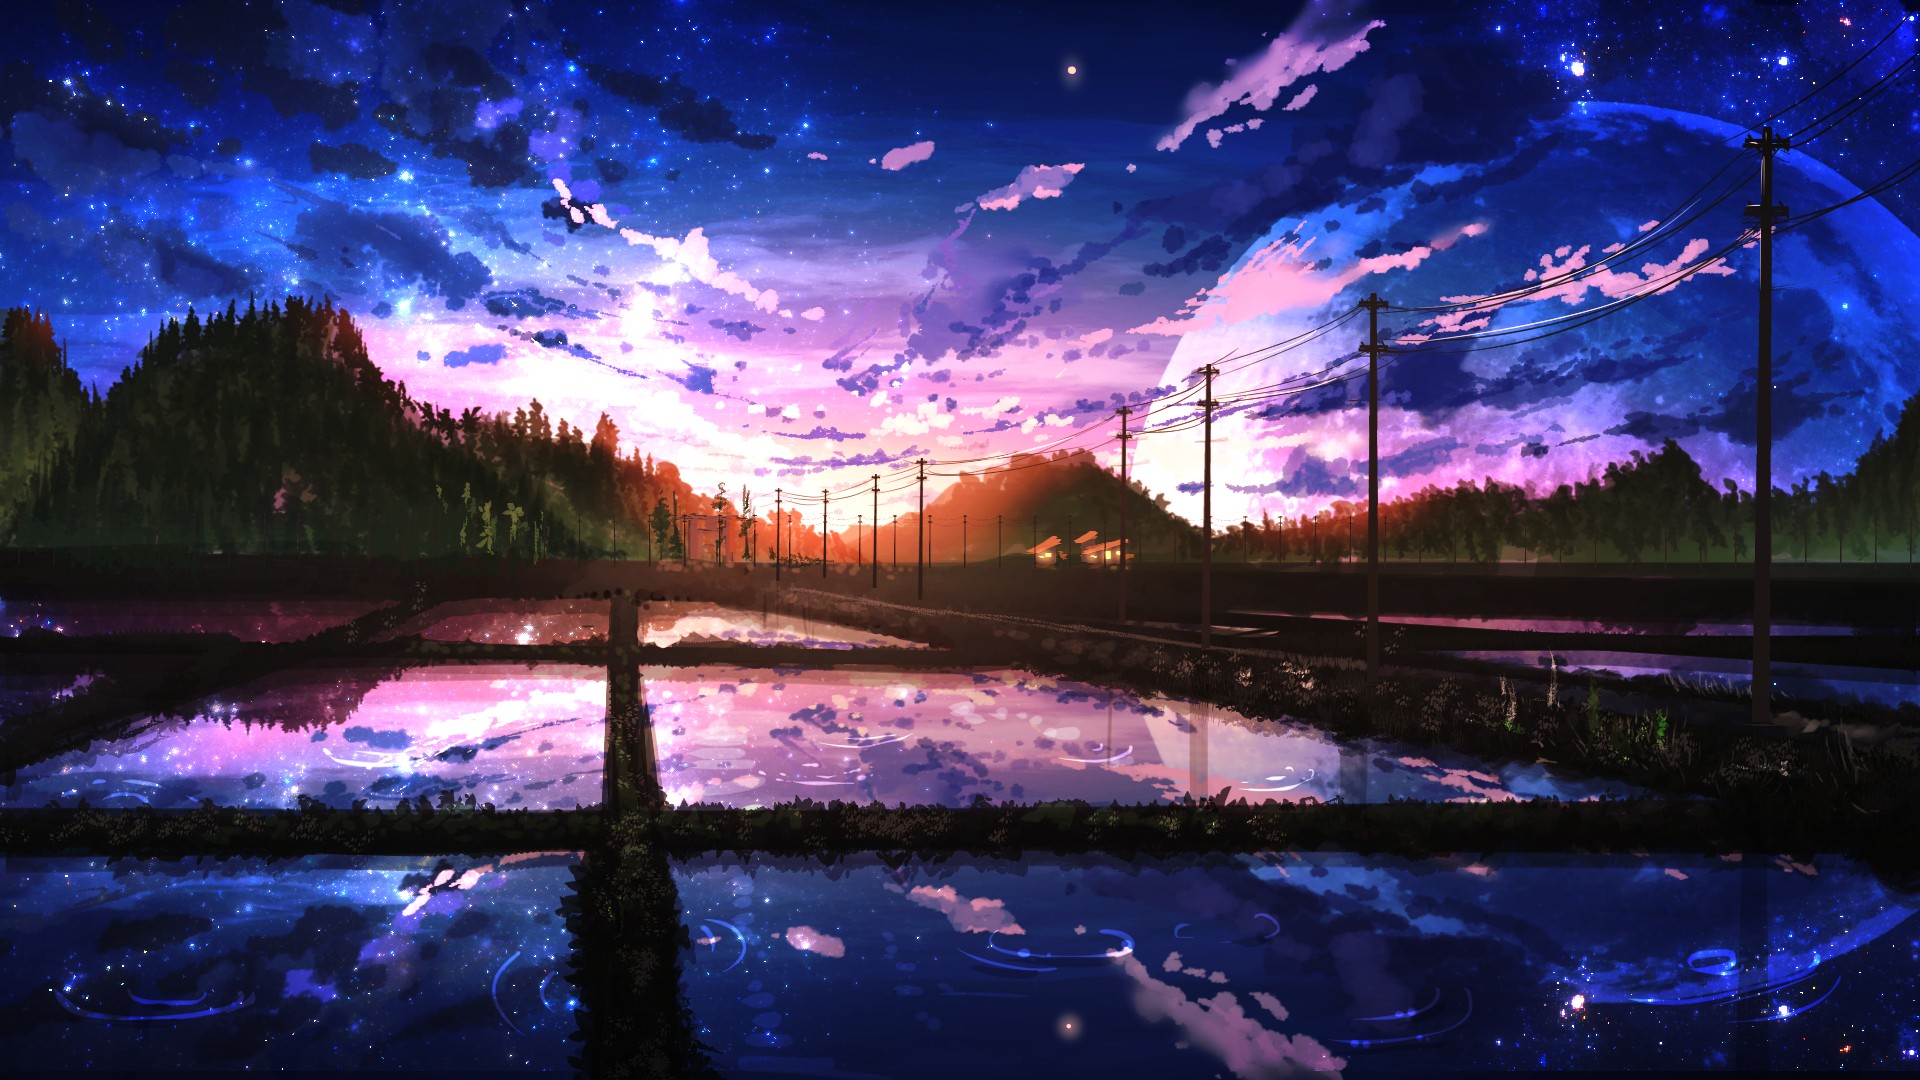 Nobody, Digital art, Landscape, Sunlight, Trees, Building, Clouds, Forest, Moon, Night, Reflection, Sunset, Water, Anime Wallpaper